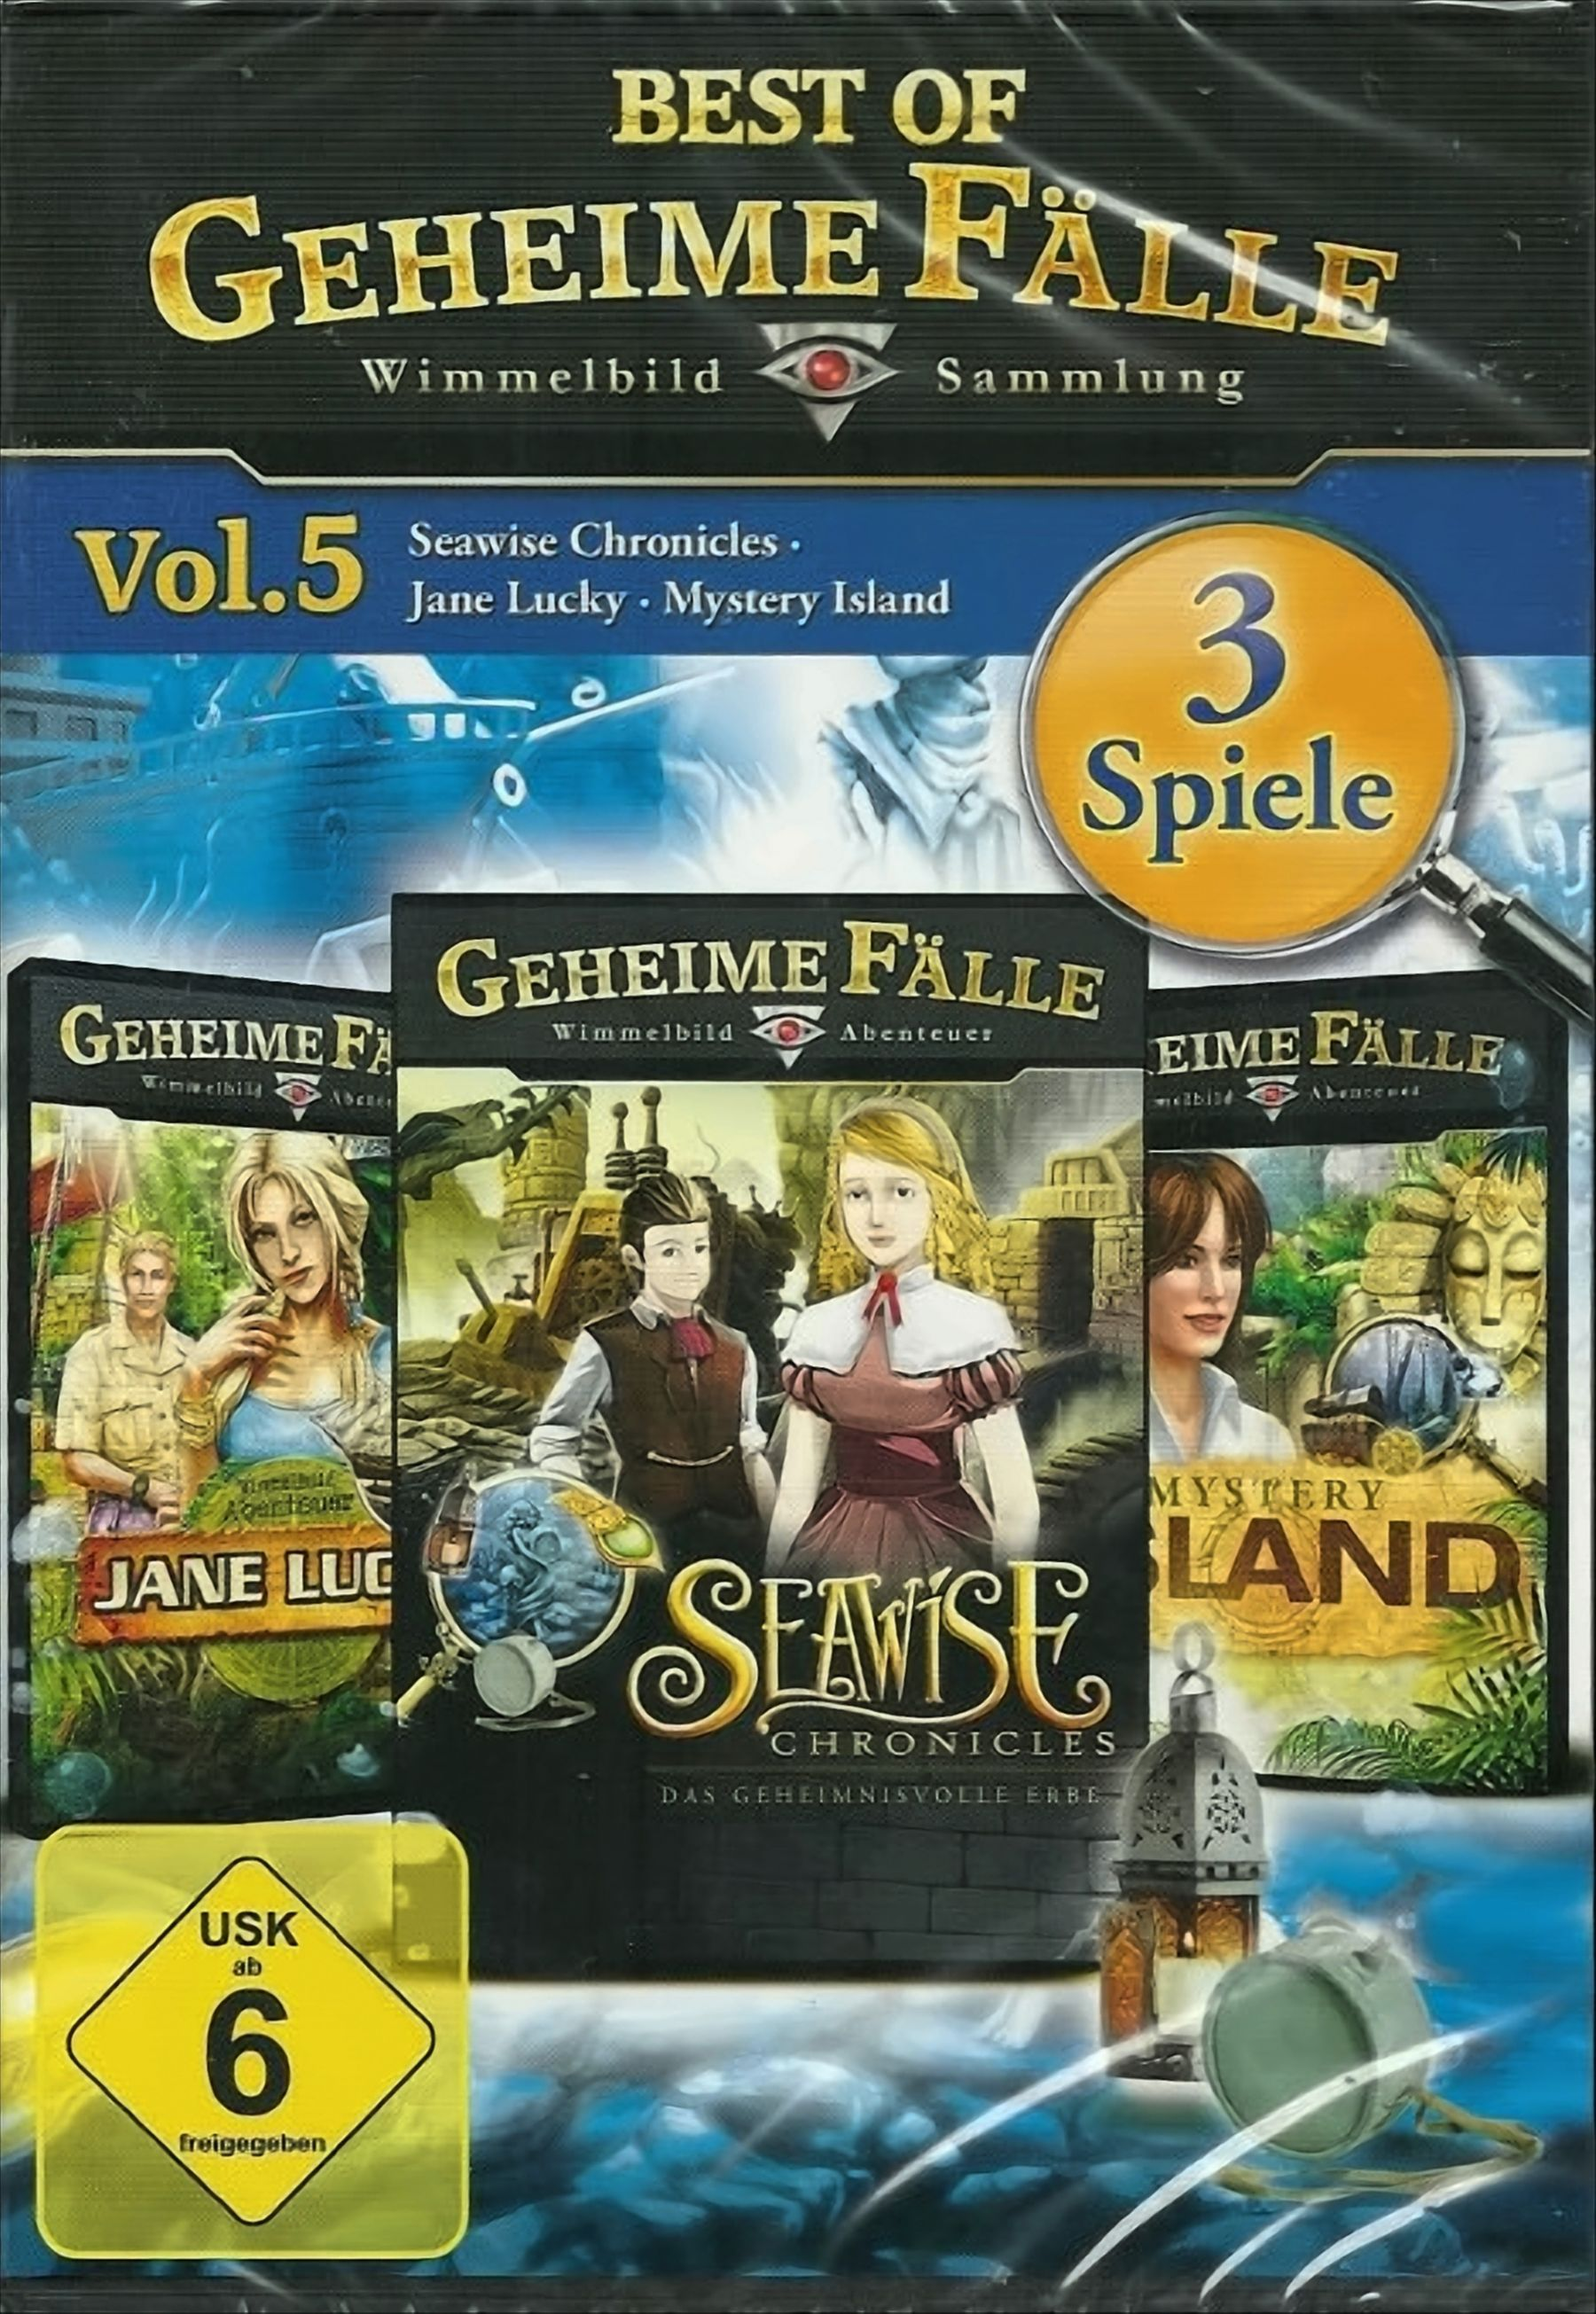 - [PC] Geheime Fälle 5 Vol. OF BEST